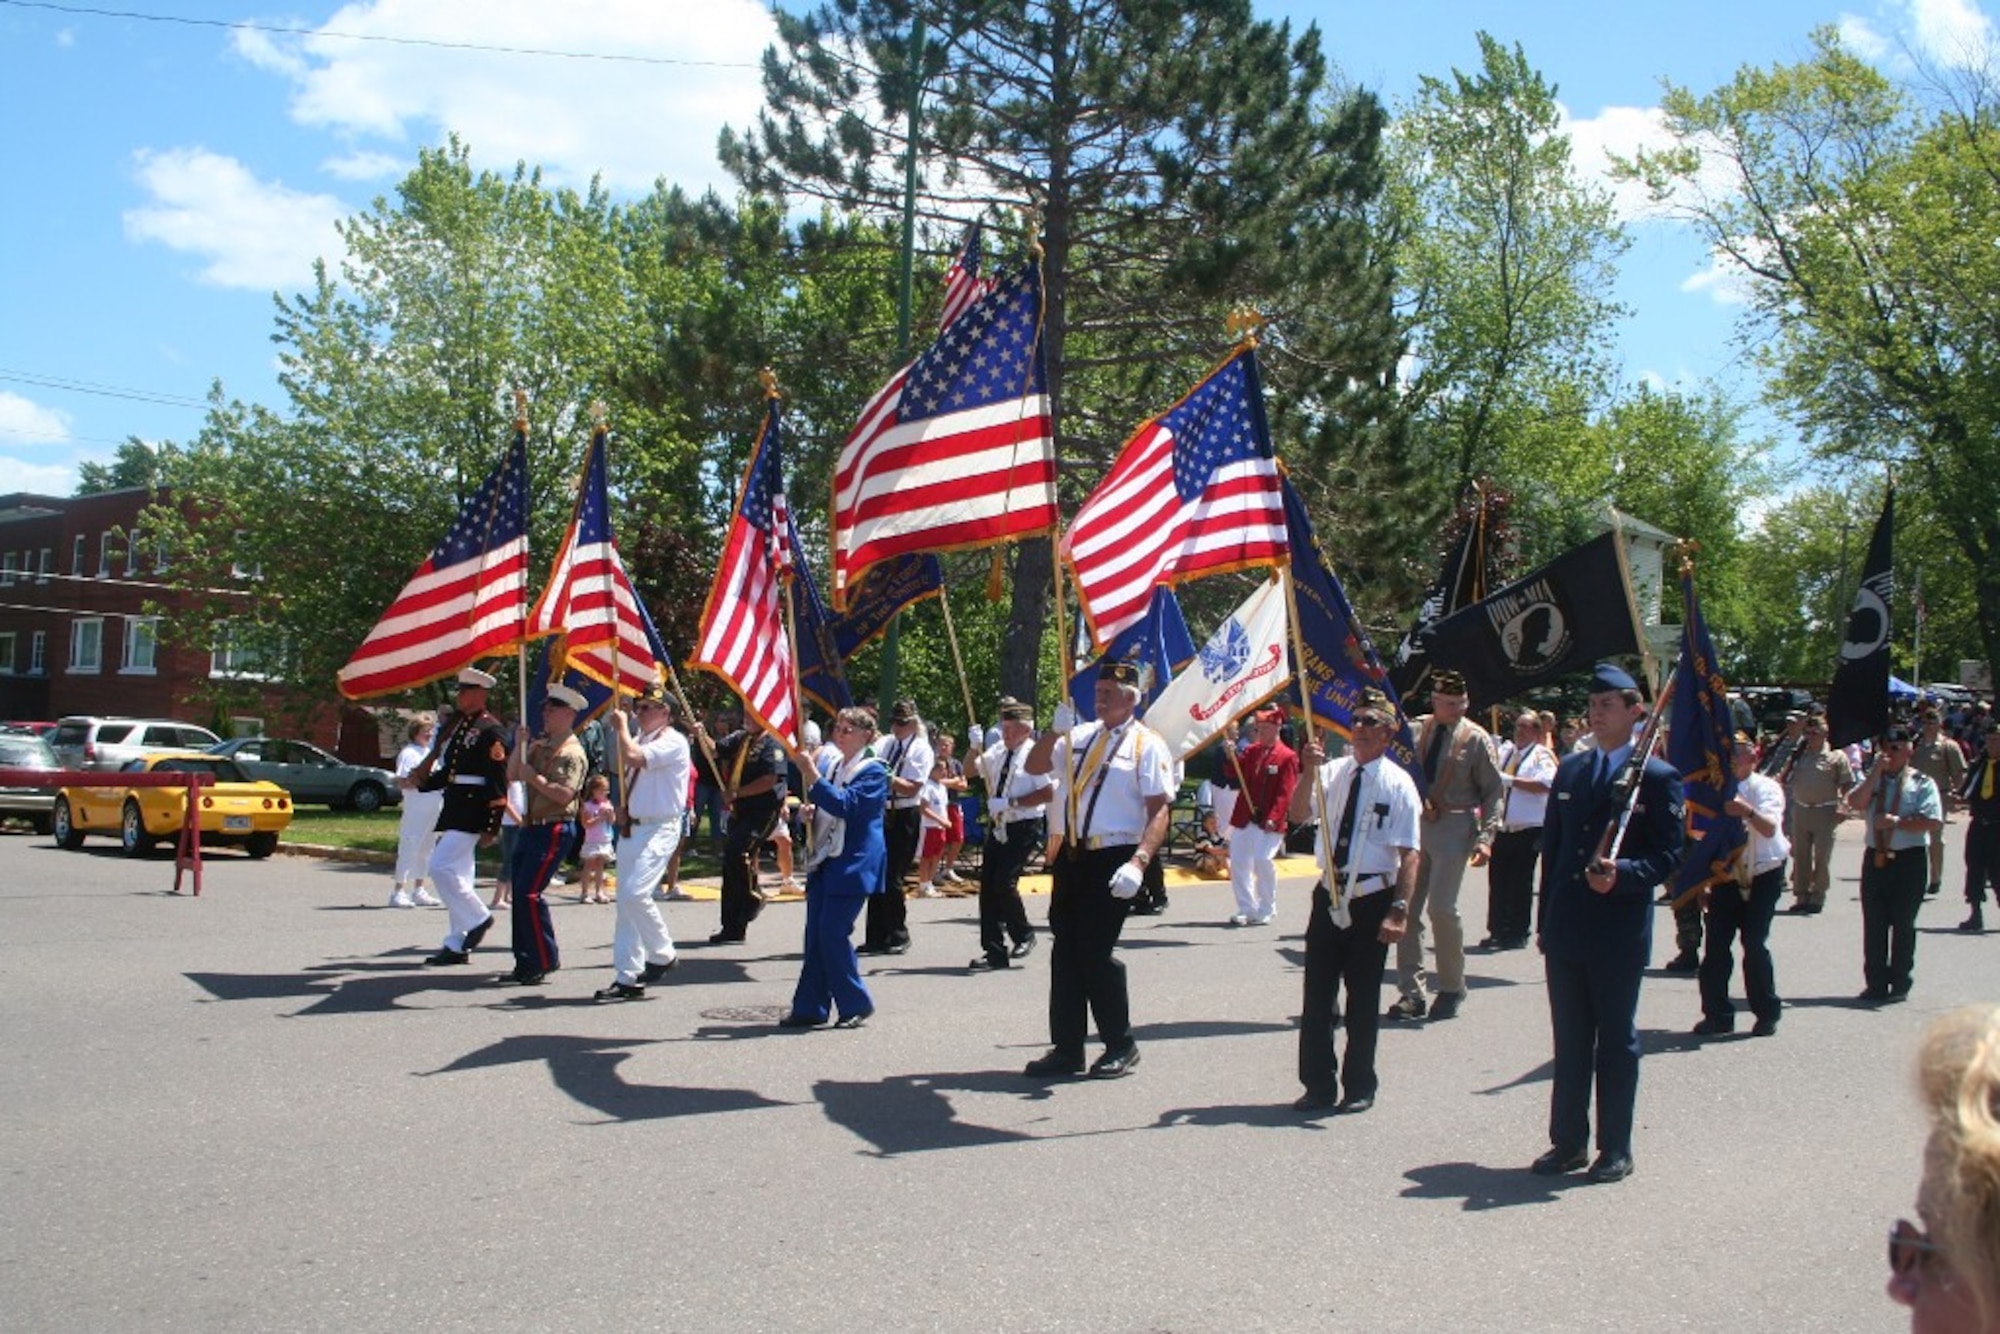 A color guard leads a parade for Independence Day festivities in Wakefield, Mich., on July 4, 2009.  (U.S. Air Force Photo/Tech. Sgt. Scott T. Sturkol)